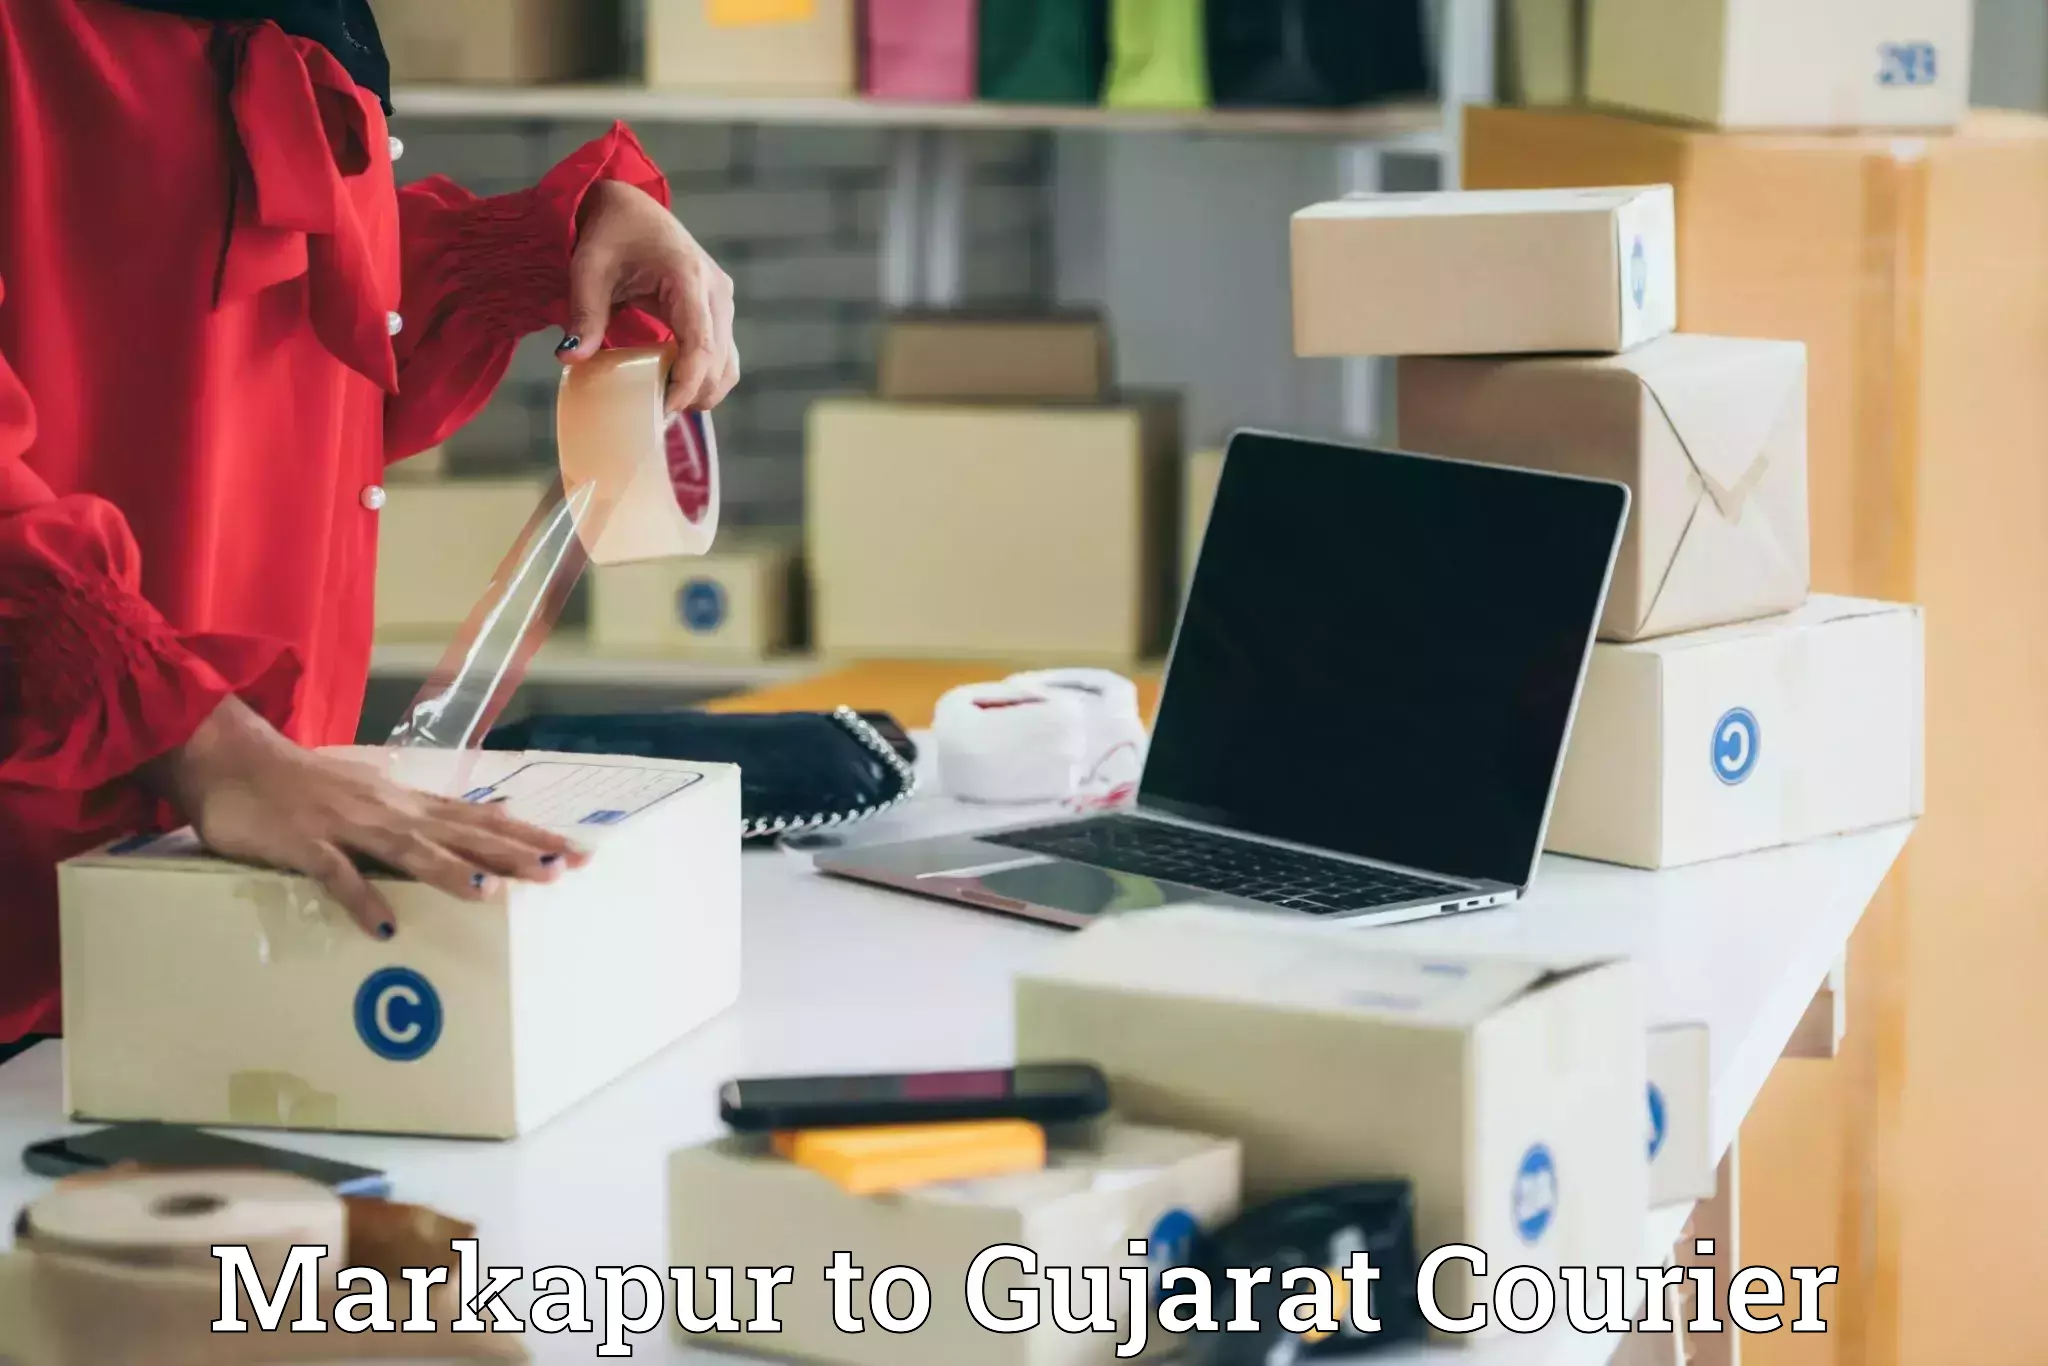 Personal courier services Markapur to Surat